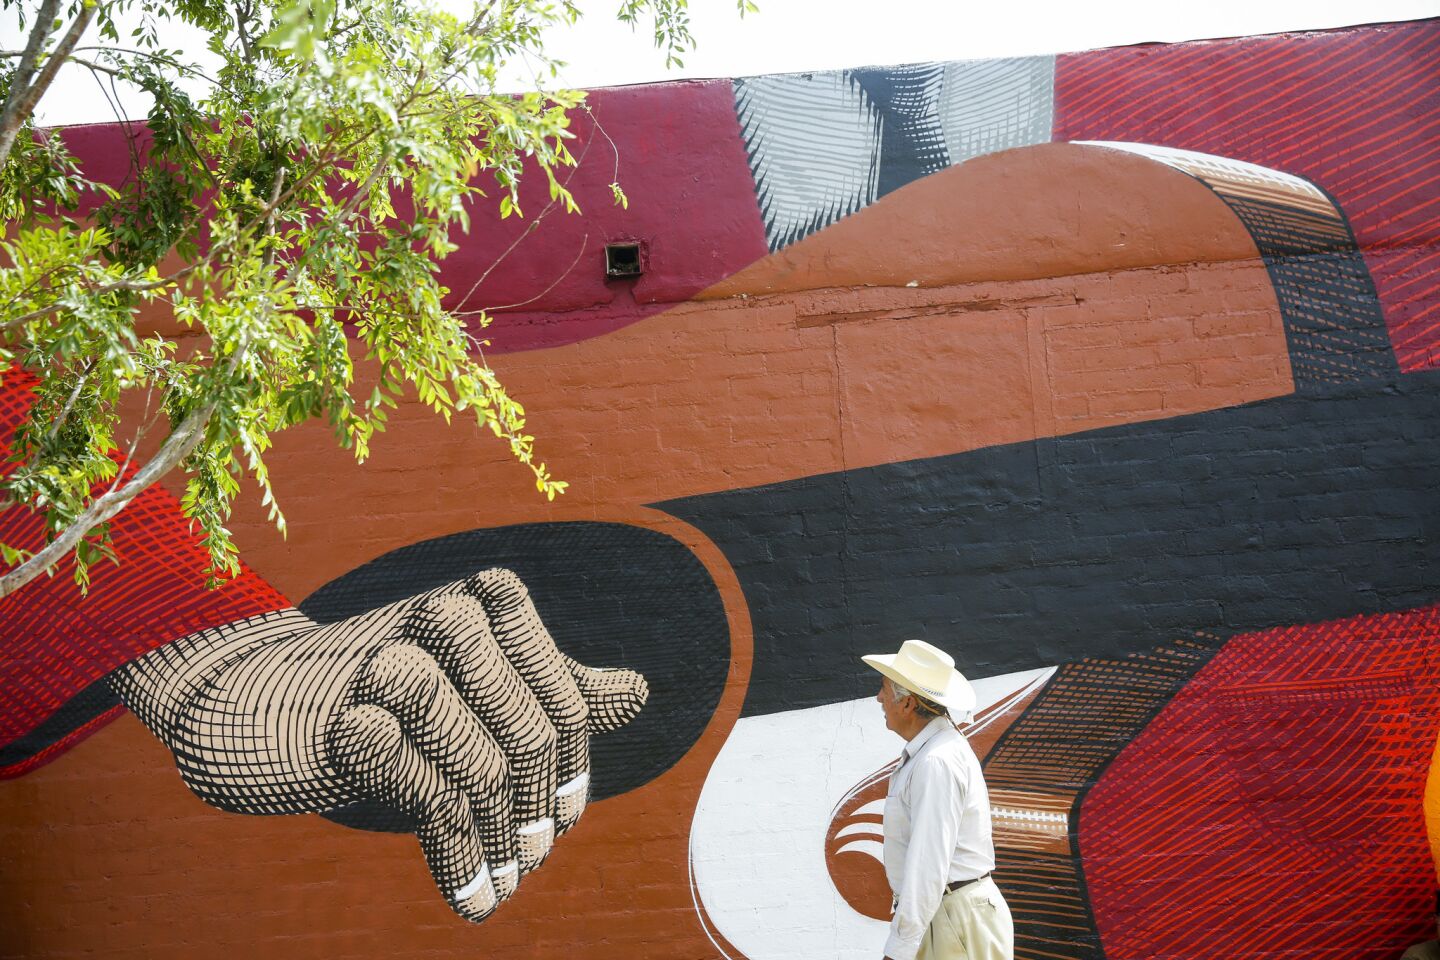 A man walks by the "A Banda," mural by internationally recognized Brazilian artist Nunca in 2014. It covers the side of a building in Coachella, about three hours south of Los Angeles.